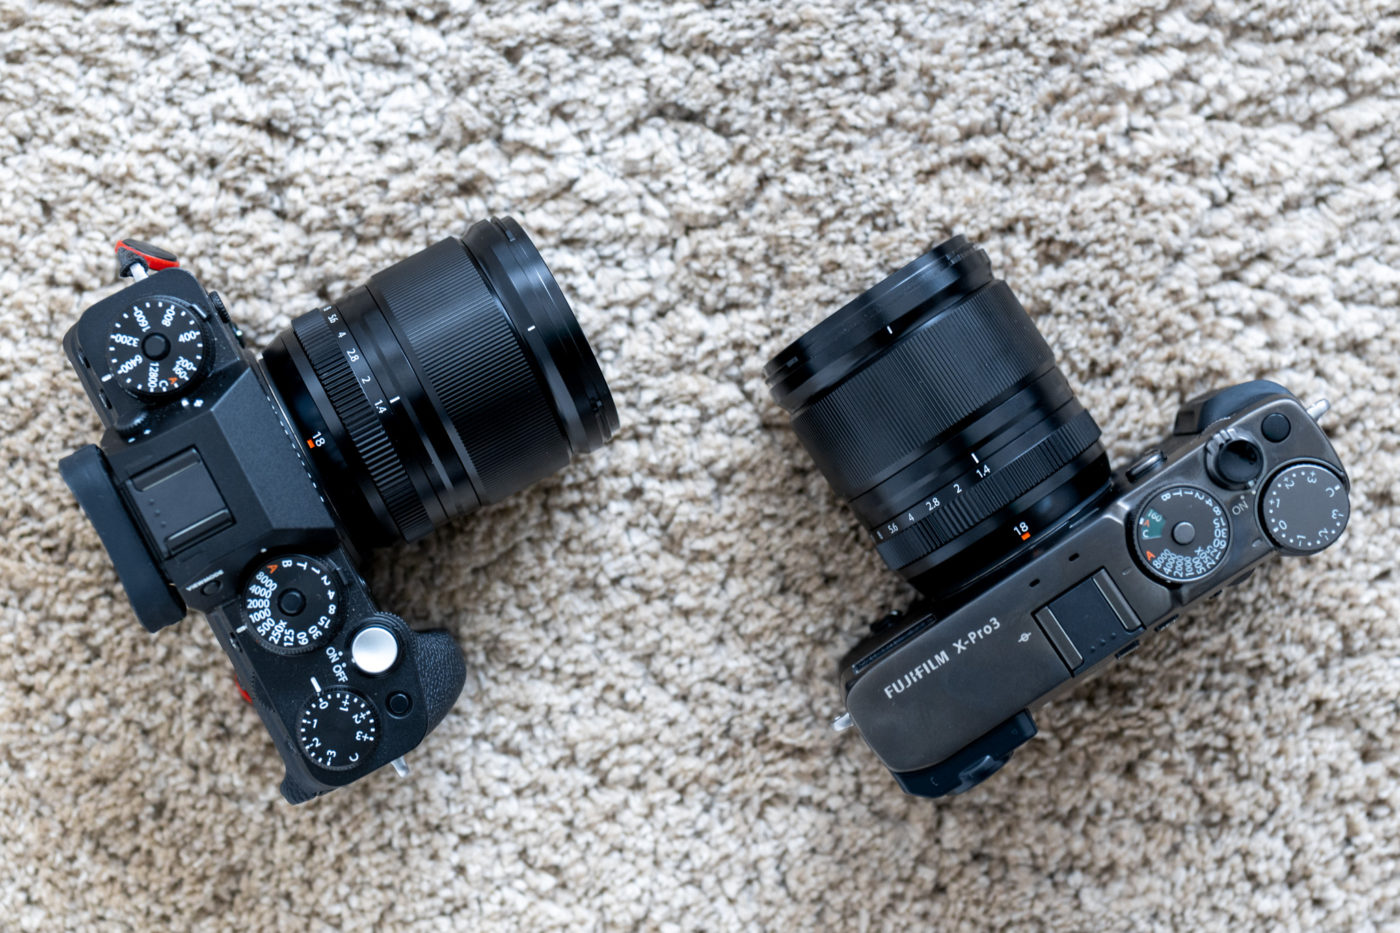 Are the Days of the Old Fujifilm Firmware Updates Gone?